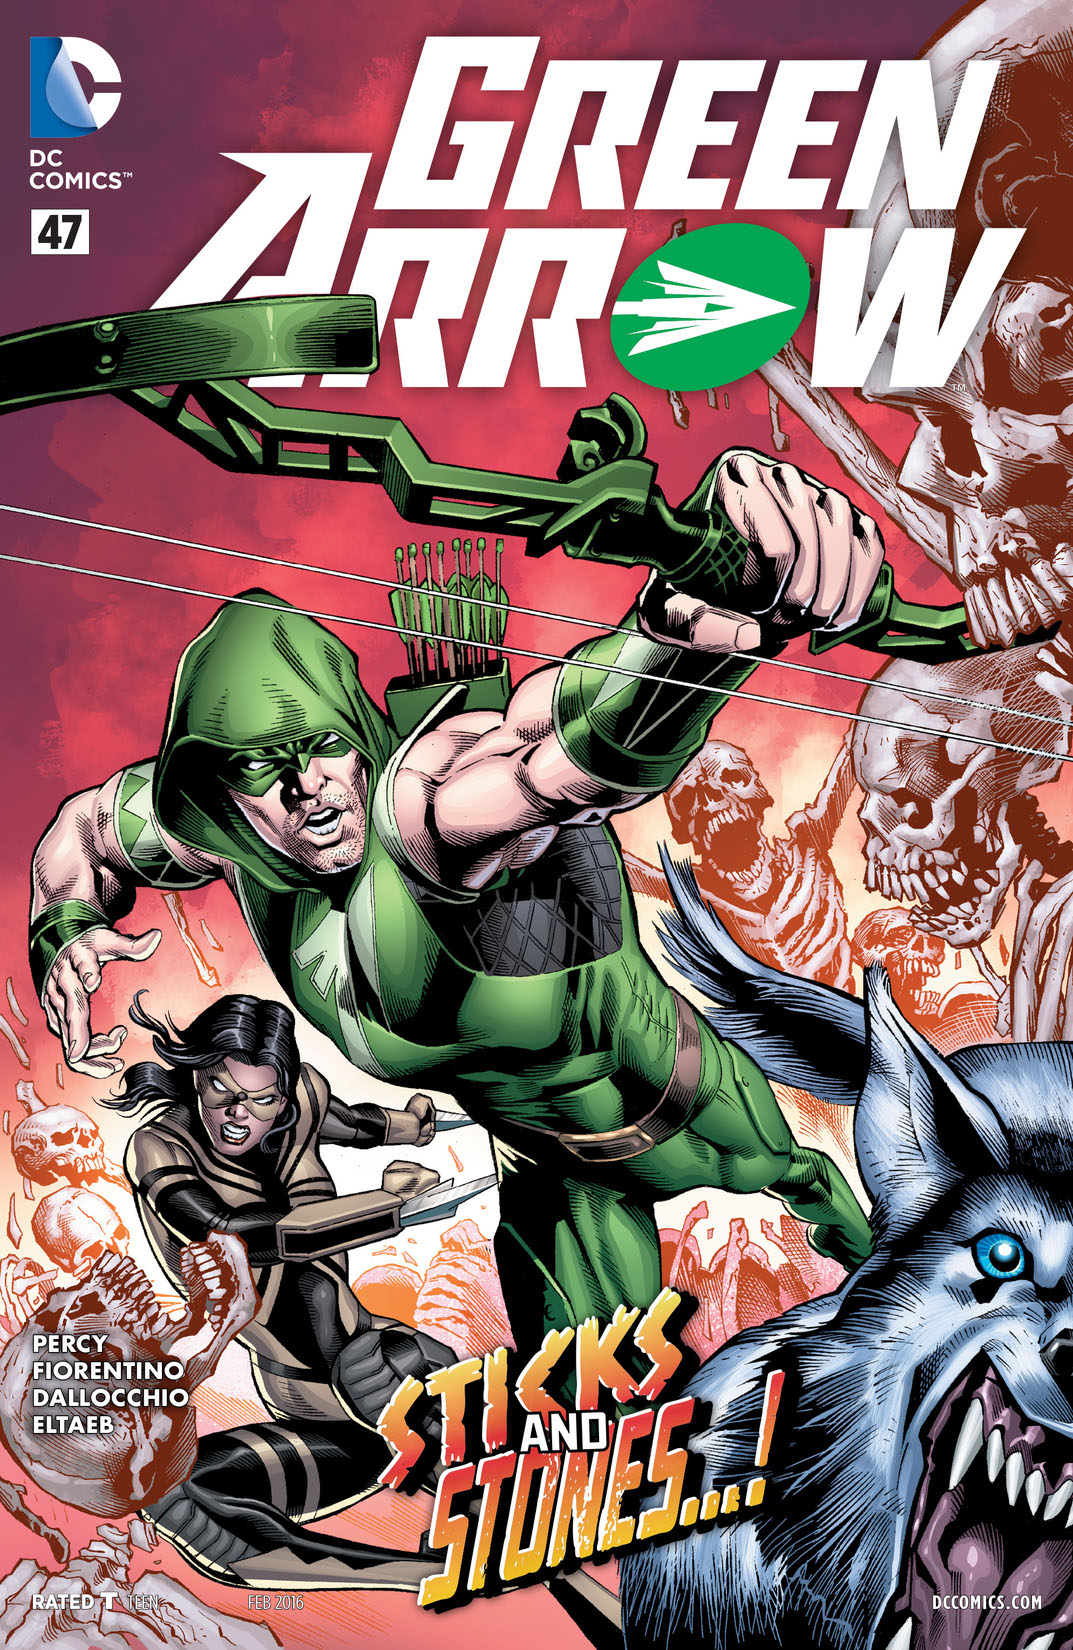 Green Arrow (2011-) #47 preview images